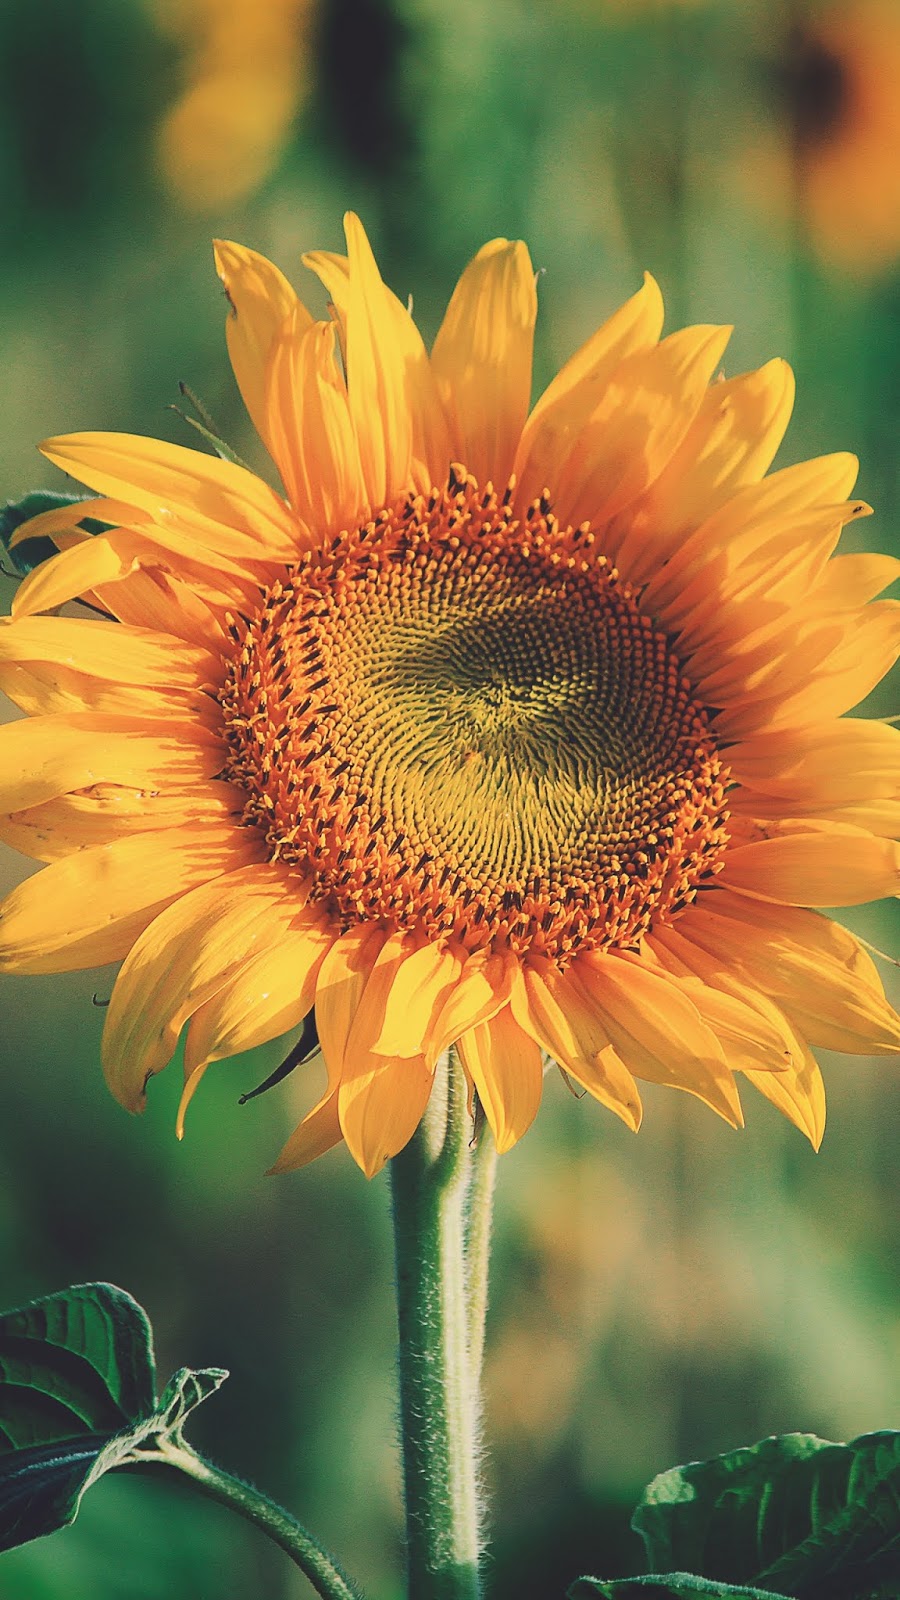 Sunflower wallpaper android